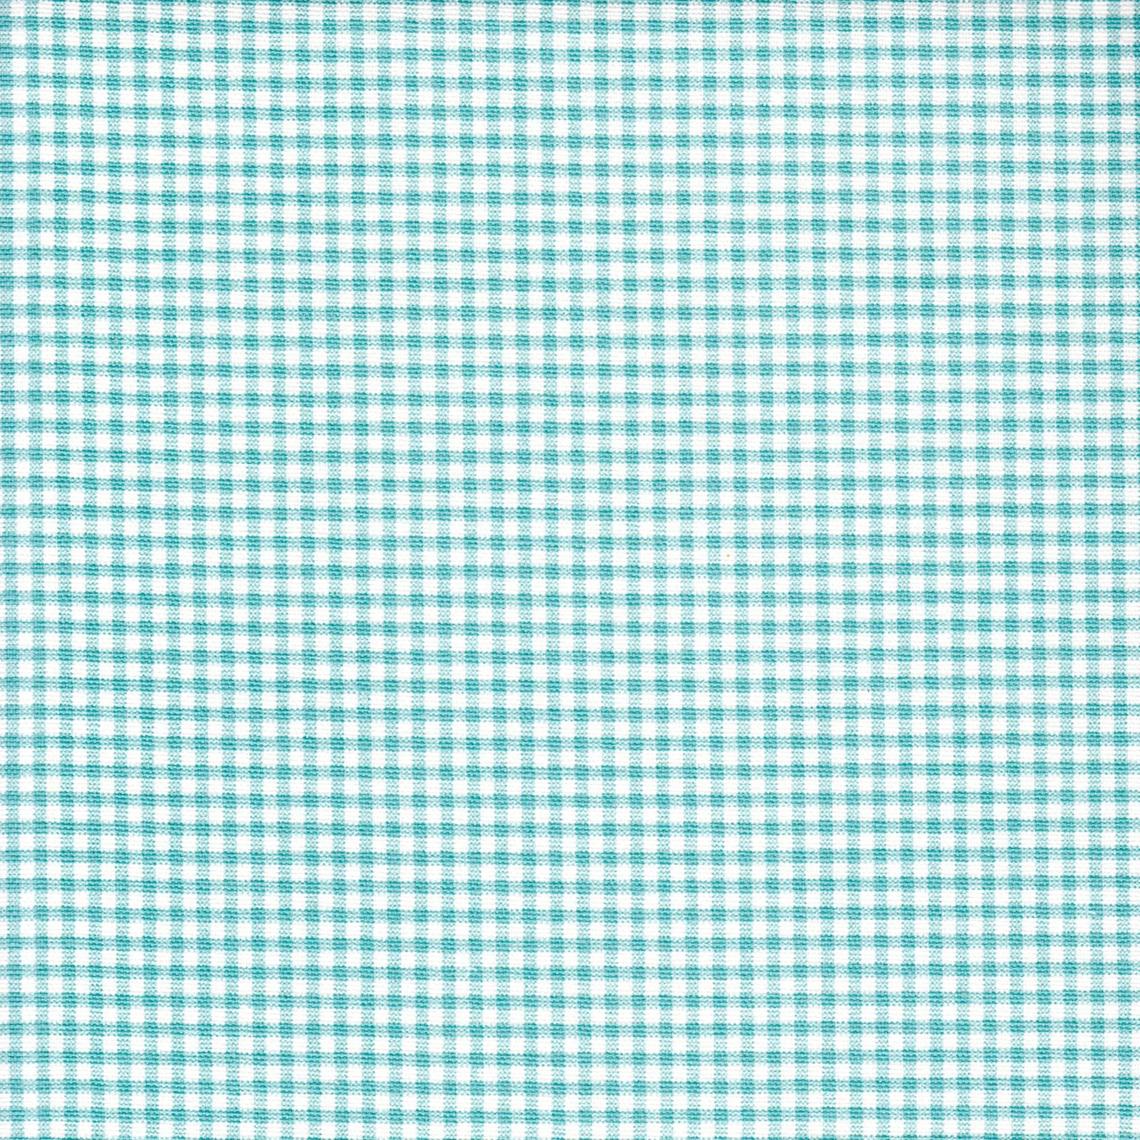 tailored bedskirt in farmhouse turquoise blue gingham check on cream